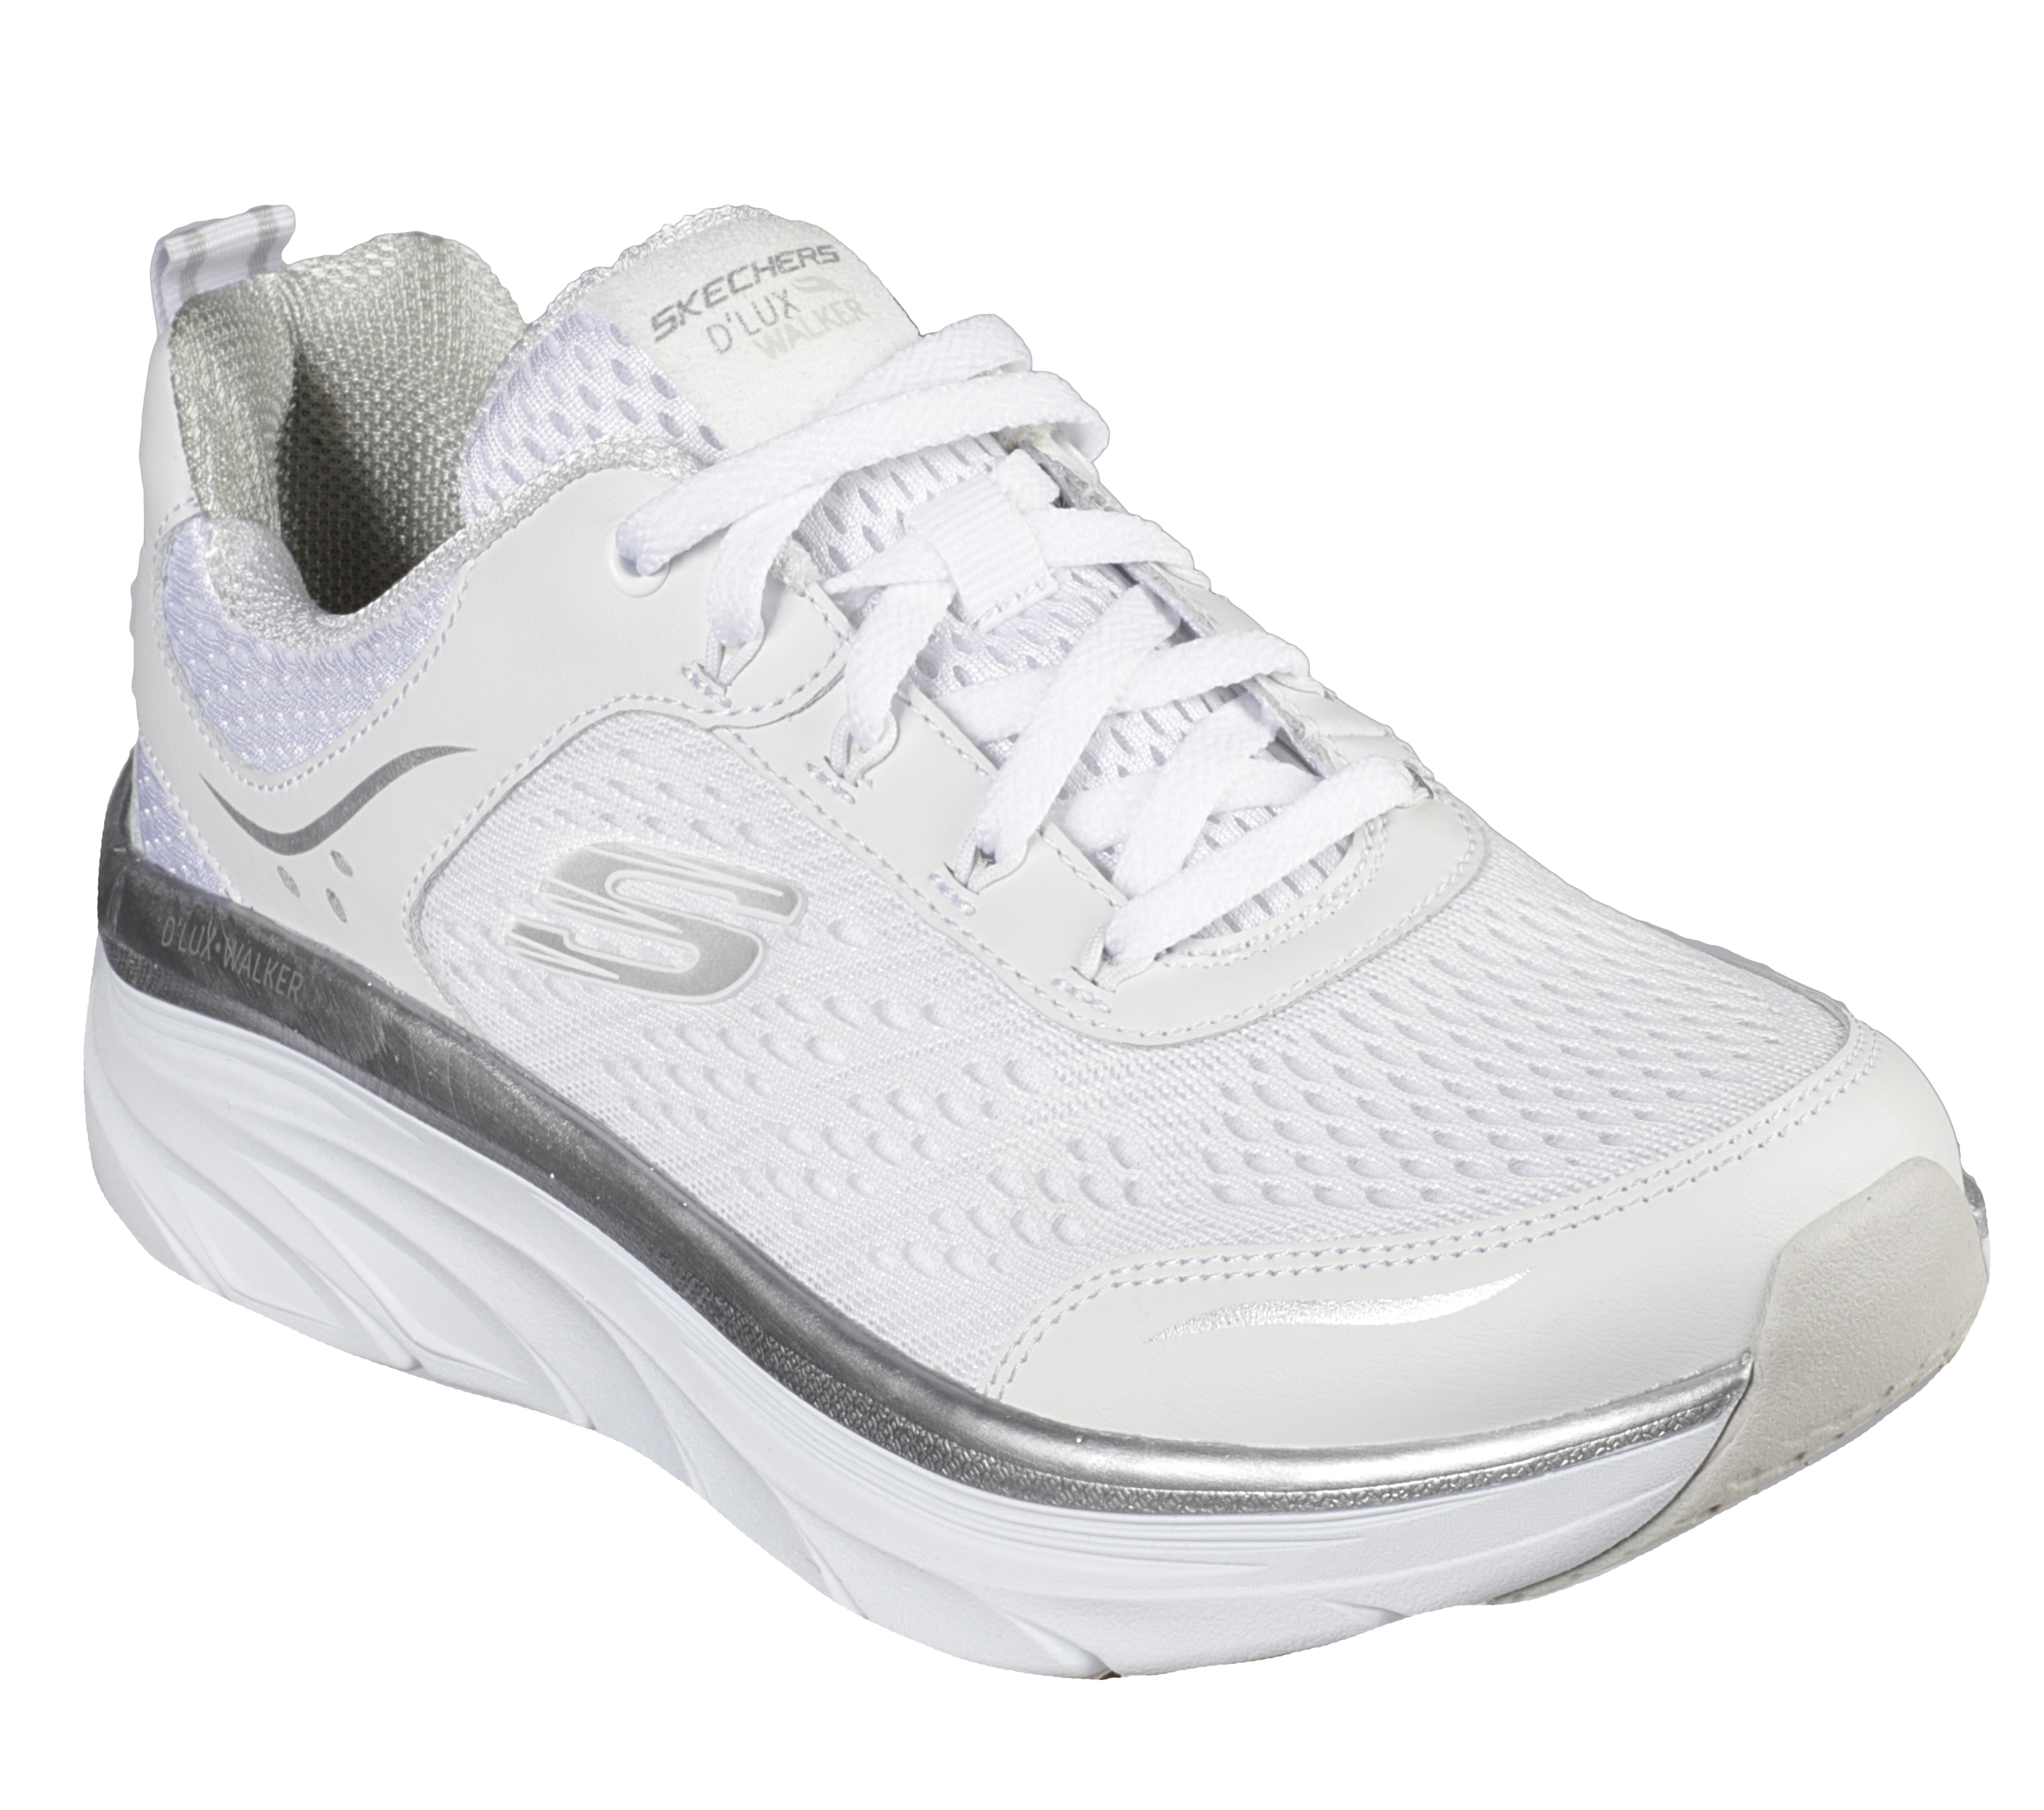 tsc.ca - Skechers Relaxed Fit: D'Lux 